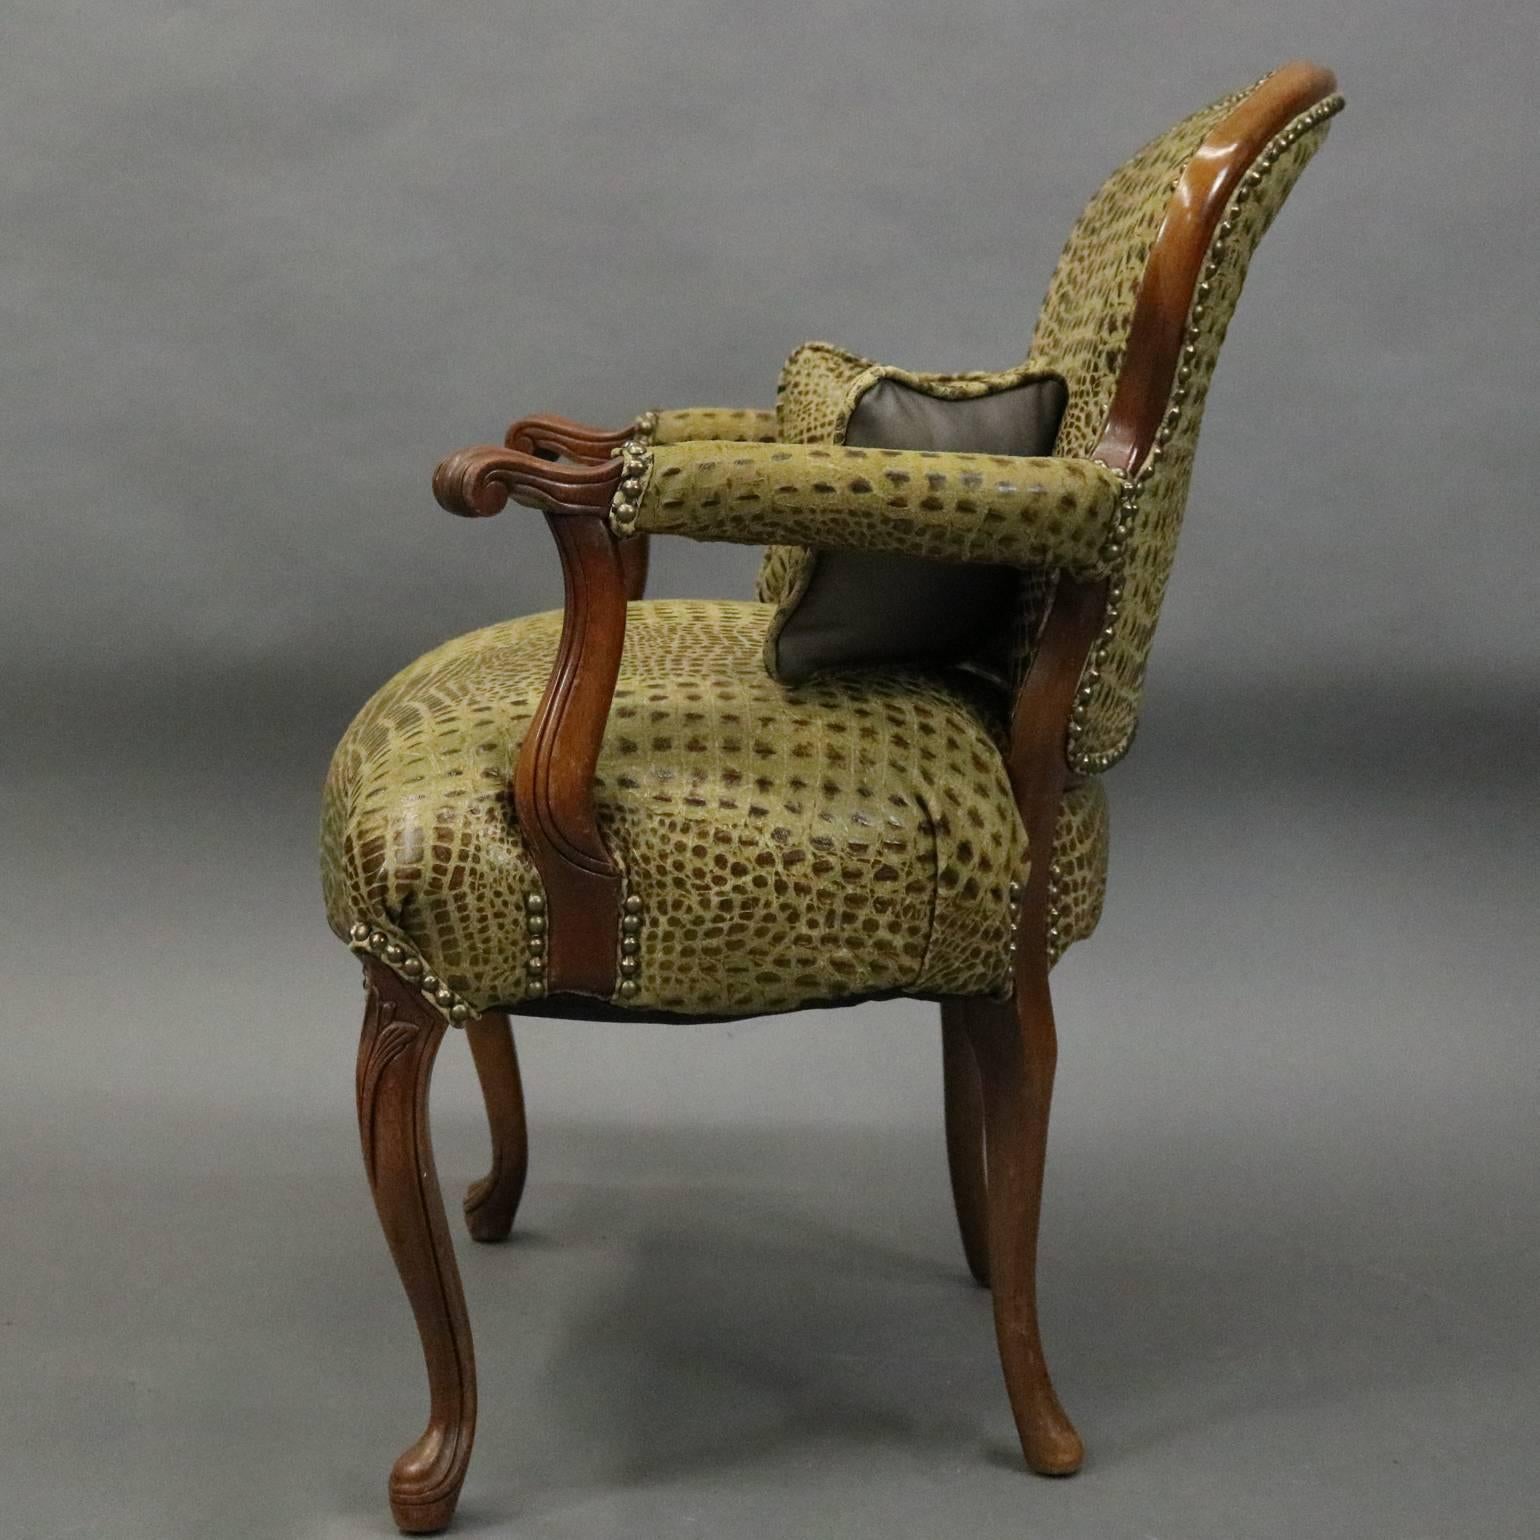 Vintage French, Louis XV style armchair features fruitwood frame with scrolled arms and cabriole legs, upholstered with crocodile/alligator skin patterned leather, three matching pillows, circa 1960

Measures: 35" H x 27" W x 27" D,